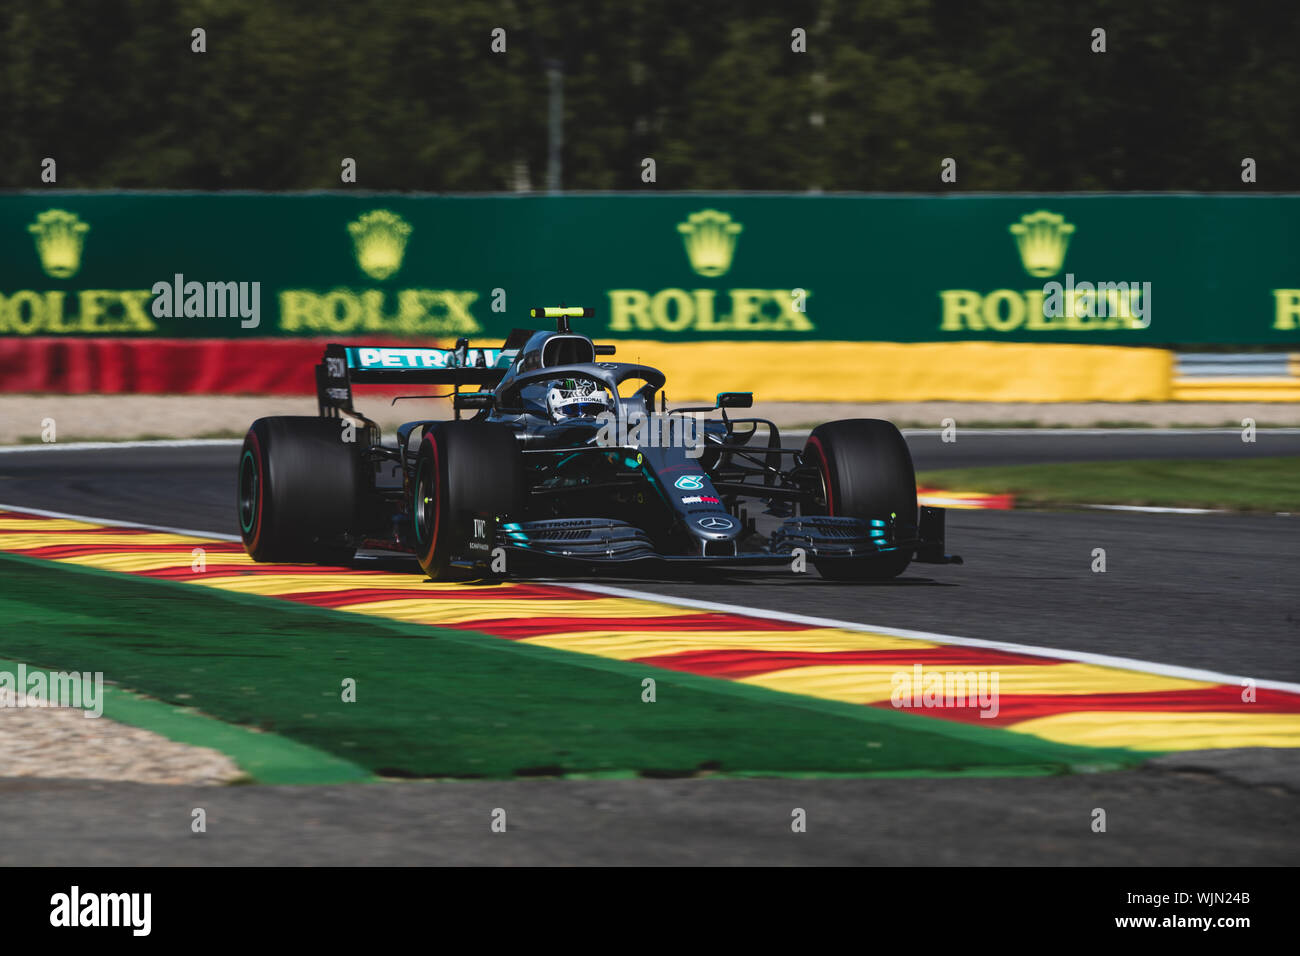 #77, Valterri Bottas, FIN, Mercedes, in action during the Belgian Grand Prix at Spa Francorchamps Stock Photo